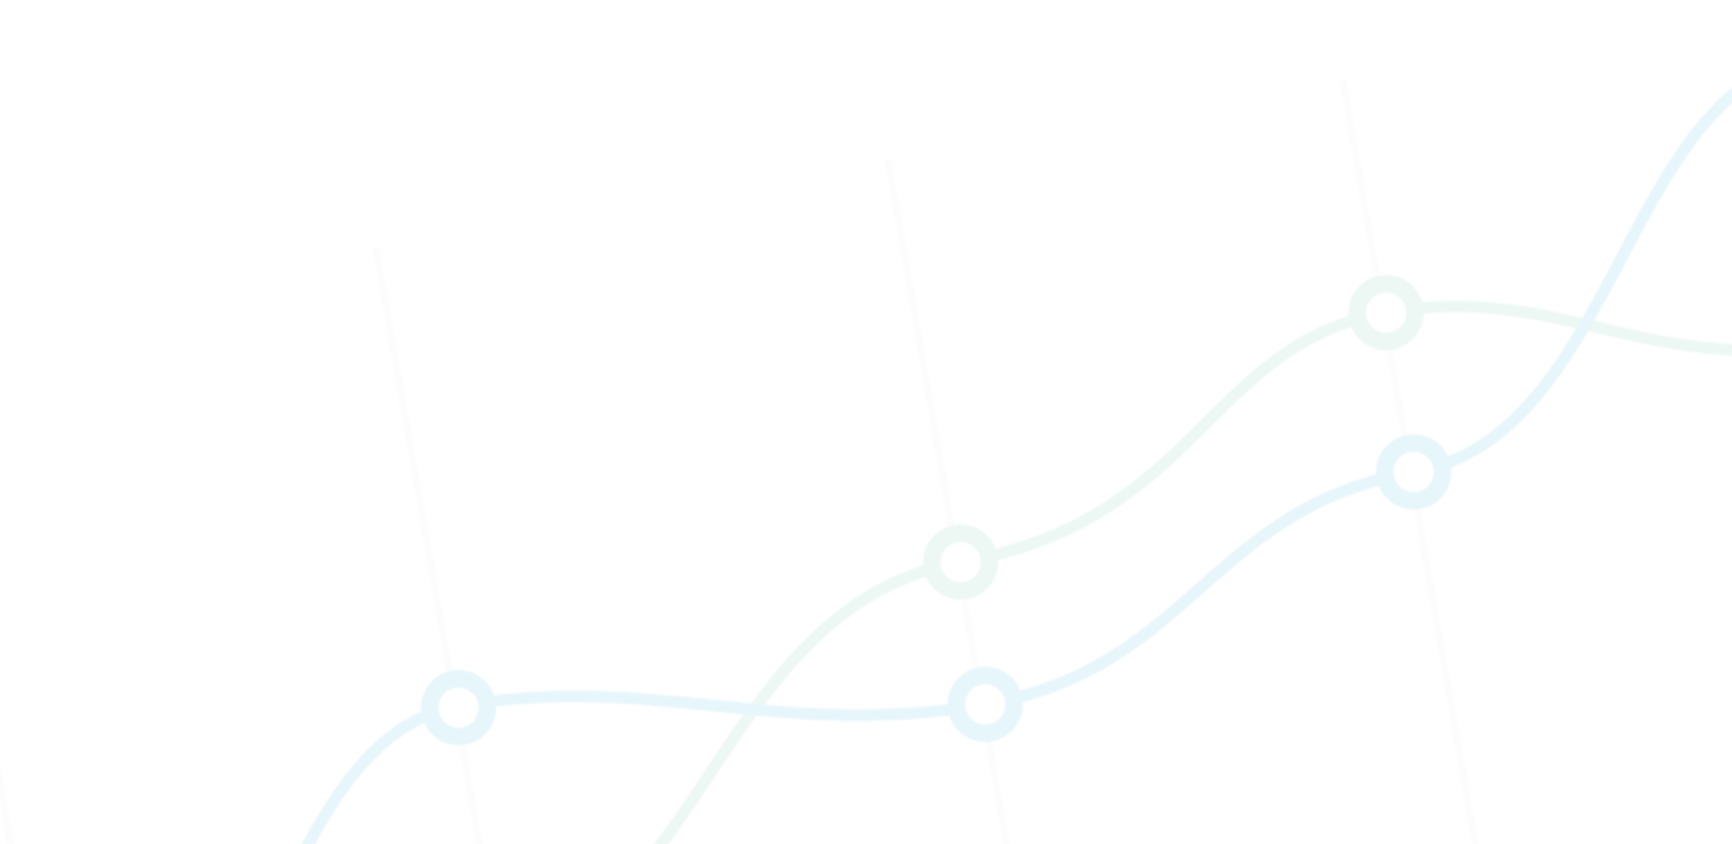 a stylized line graph showing a blue and a green line with hollow circular points